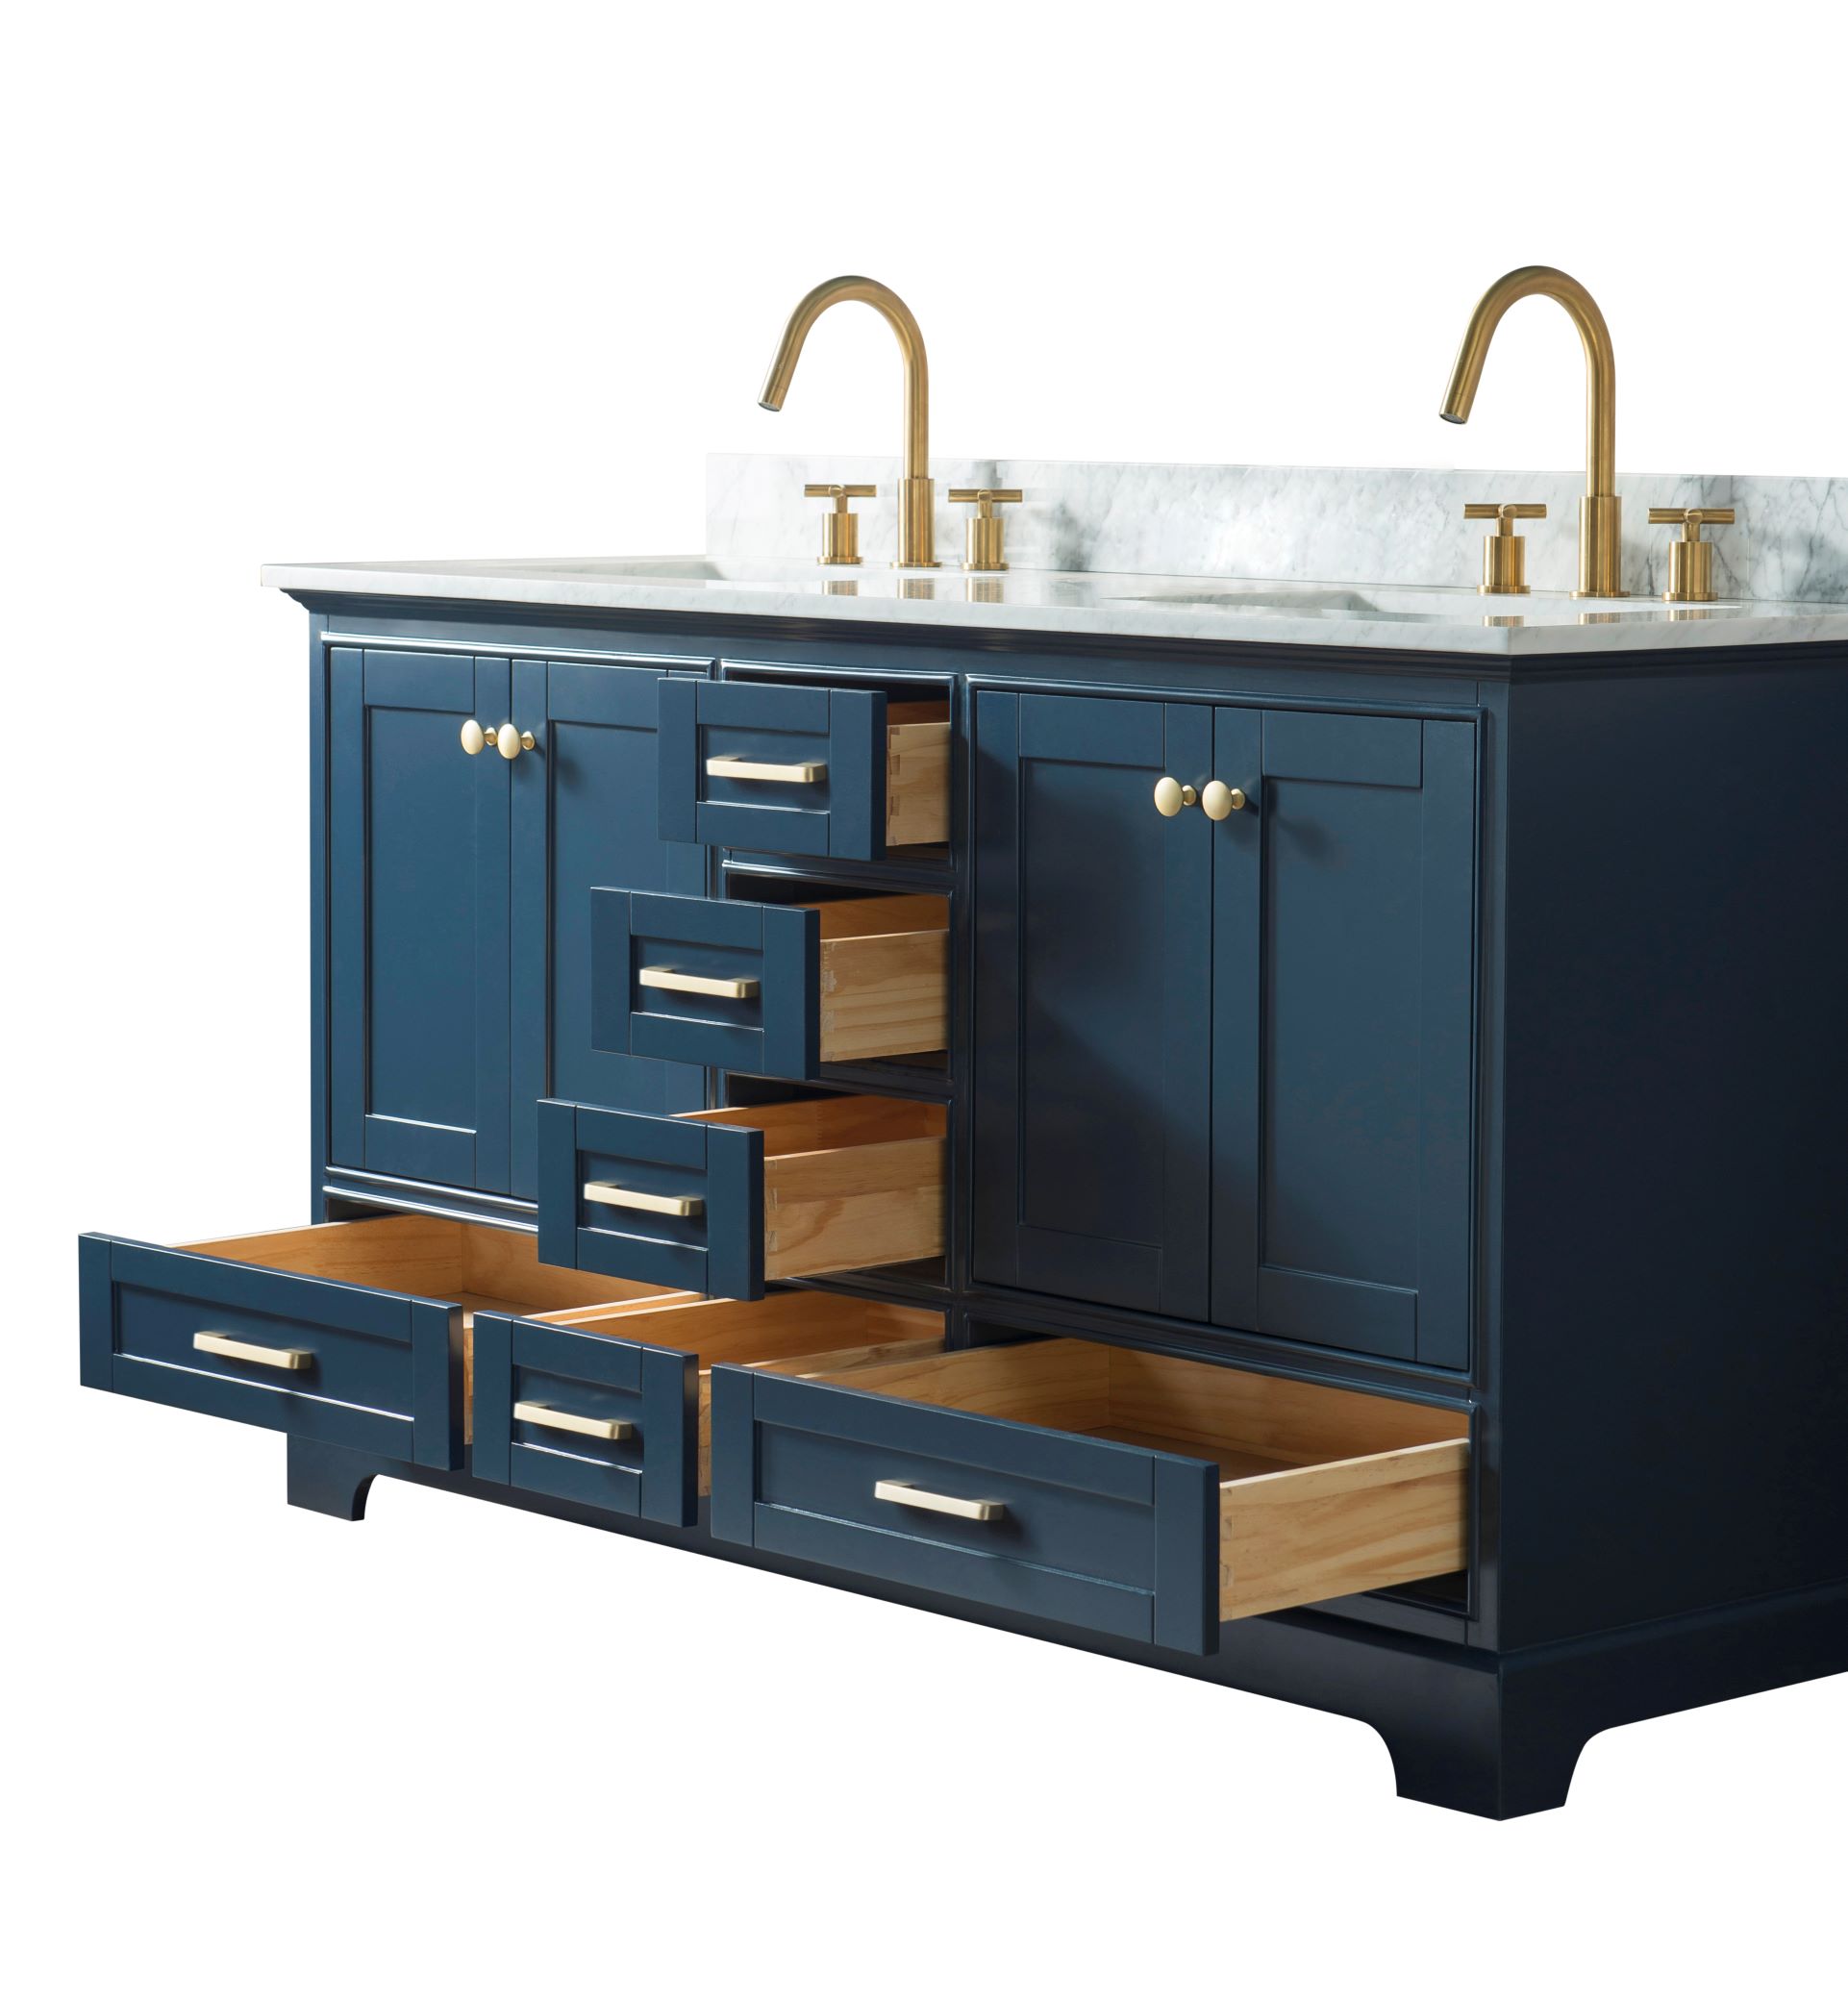 72" Double Sink Bathroom Vanity in Blue Finish with